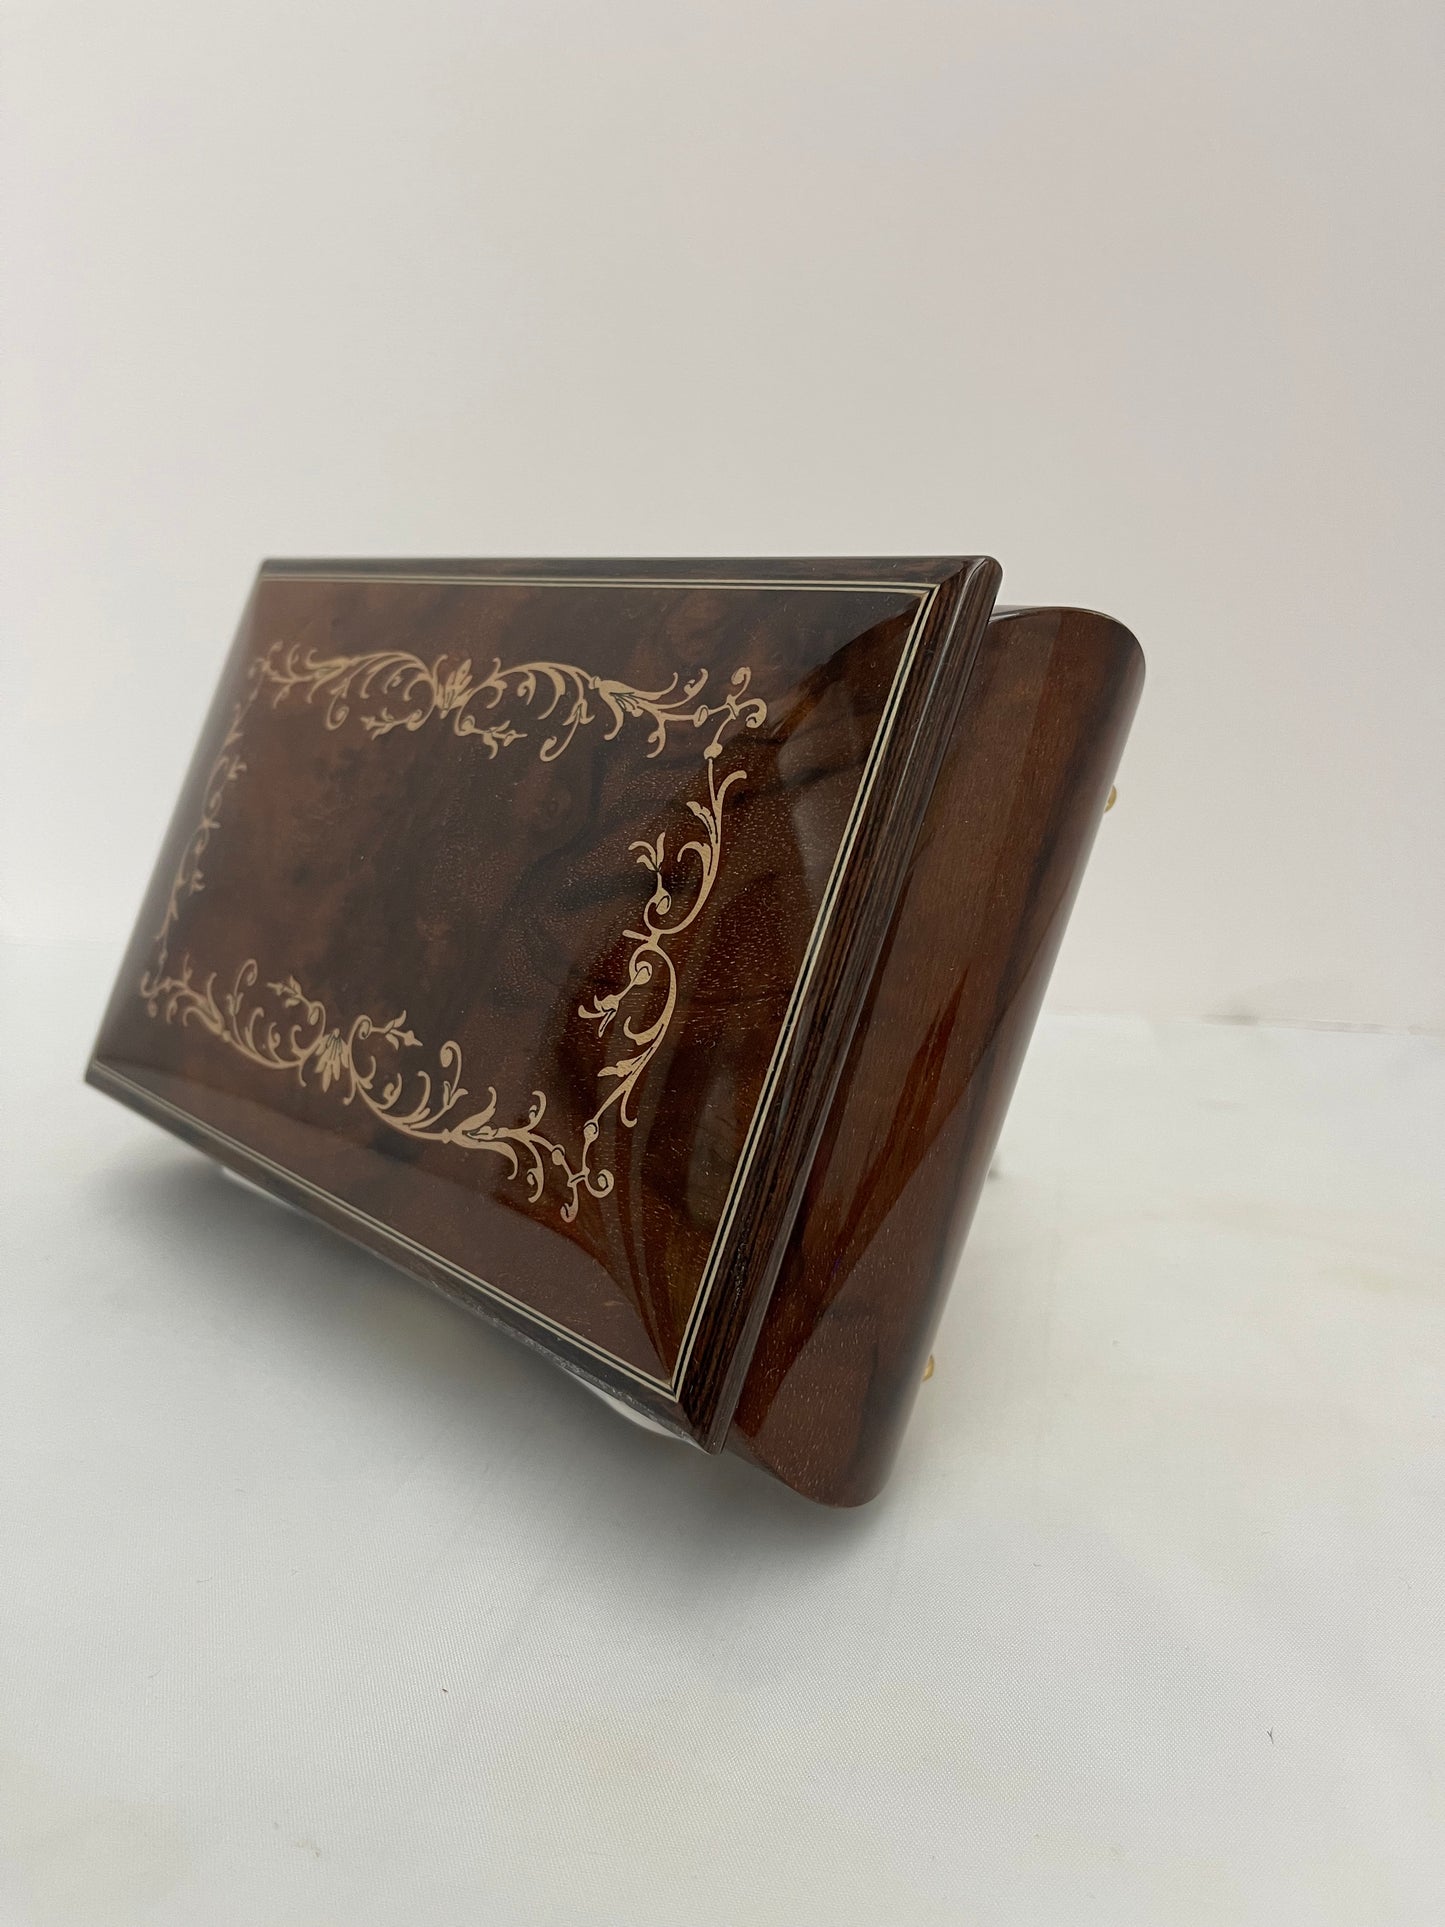 Inlaid Sorrento Italy Music Box, Reuge "Moon River”